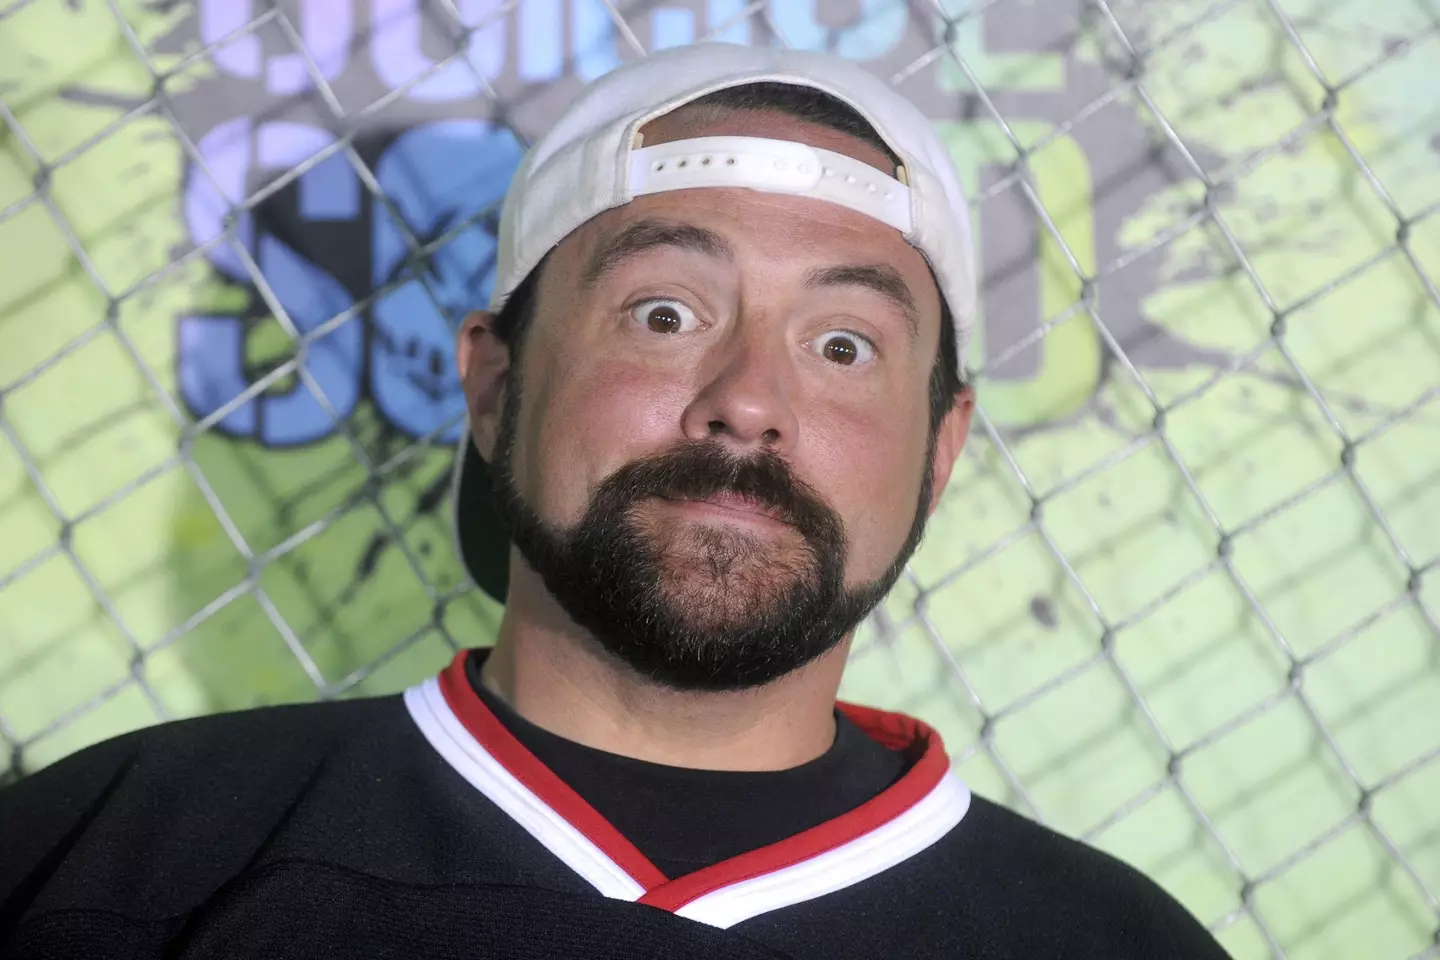 American filmmaker, actor and comedian Kevin Smith at the premiere of Suicide Squad.